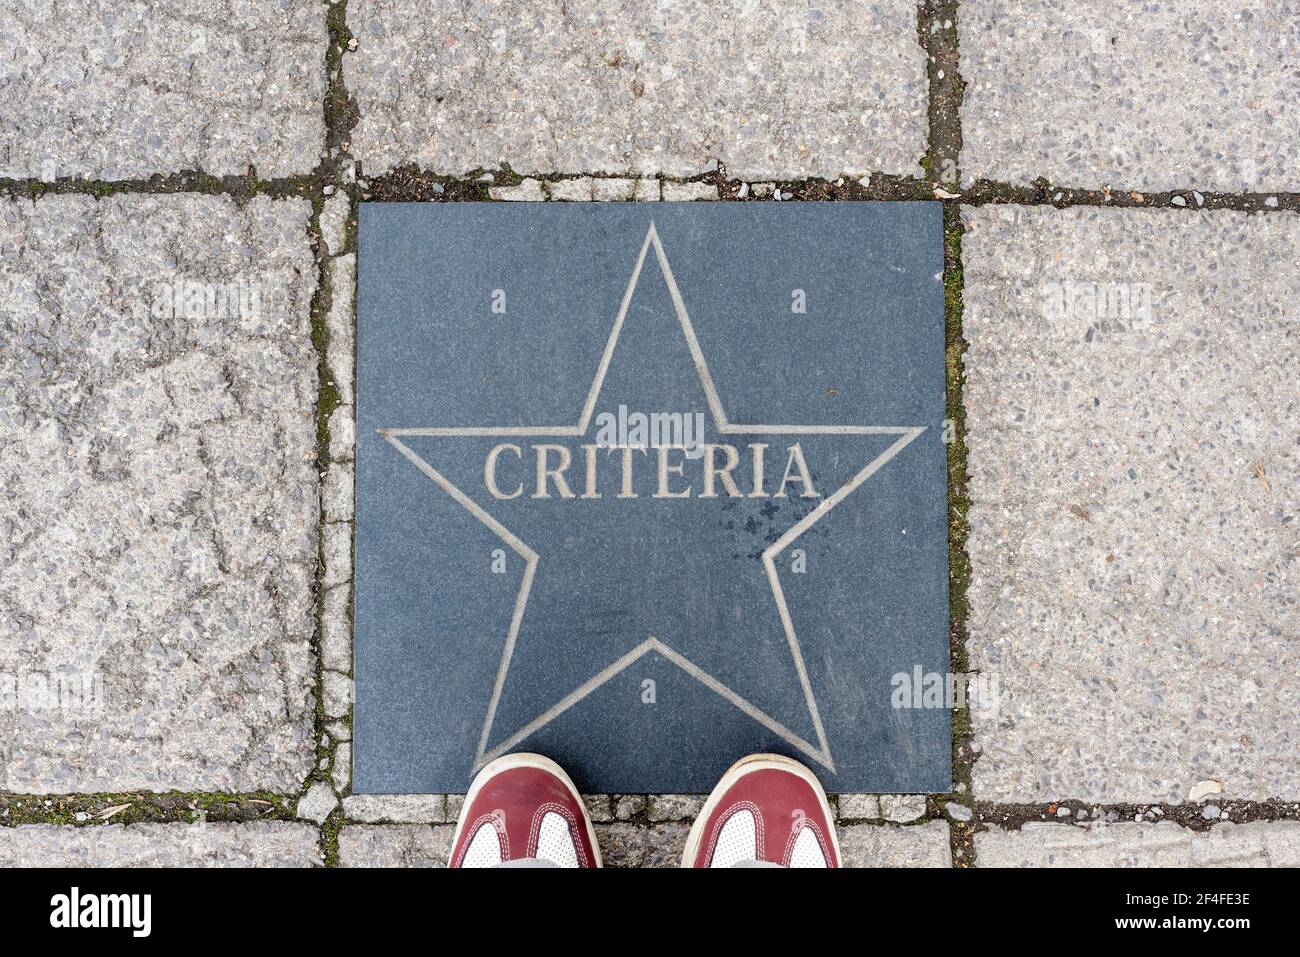 Criteria text in star shaped sign on sidewalk or pavement and sneakers partly visible, top view. Concept. Stock Photo